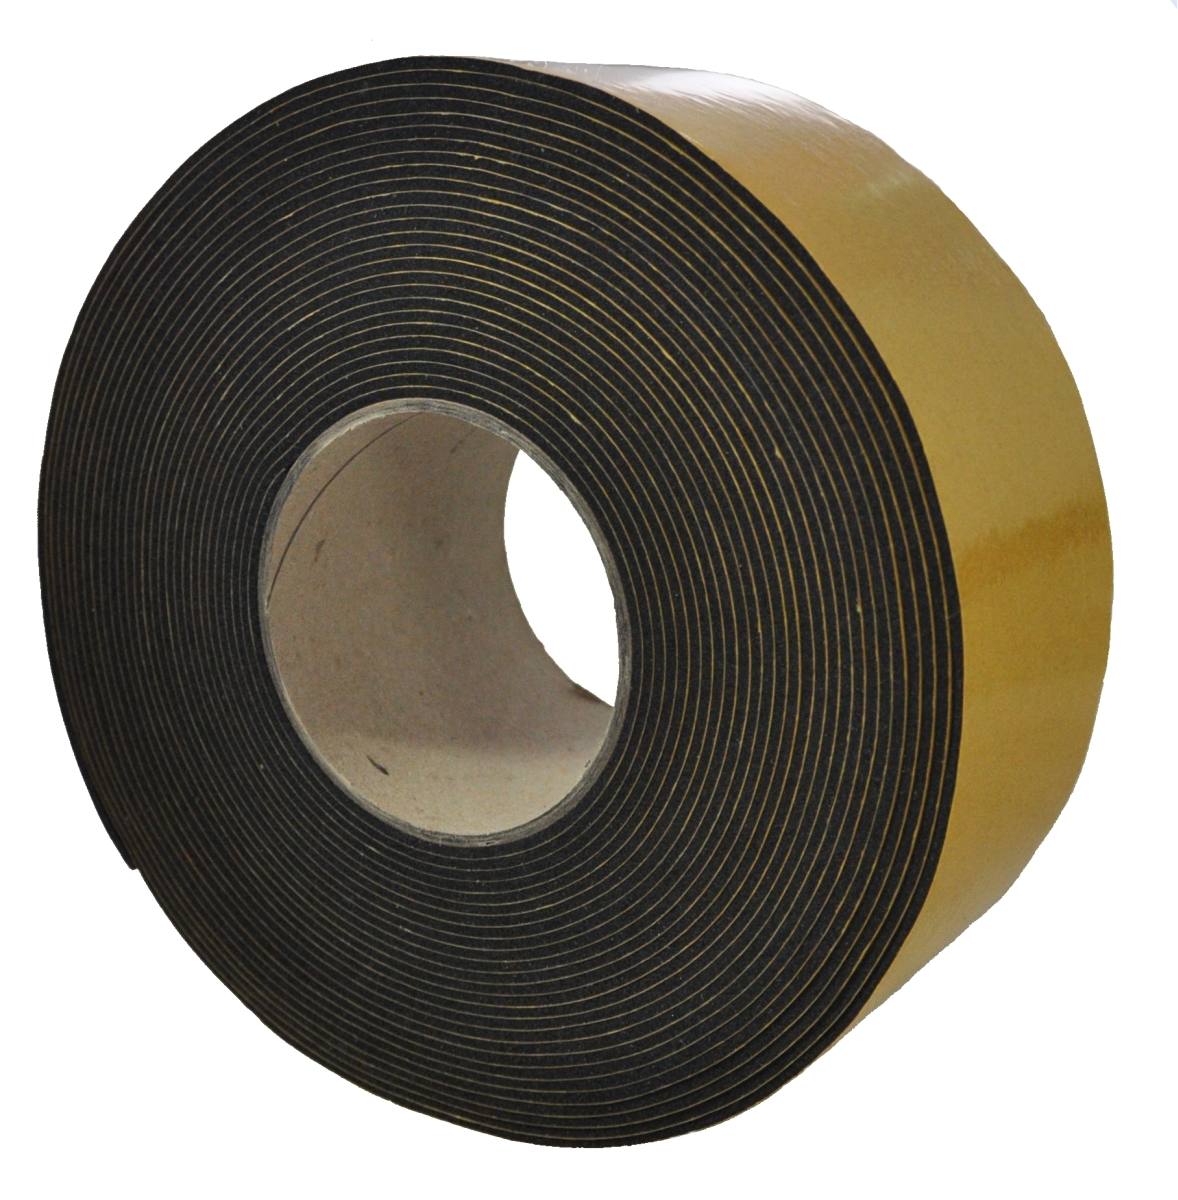 S-K-S EPDM 6mmx9mmx10m black self-adhesive on one side